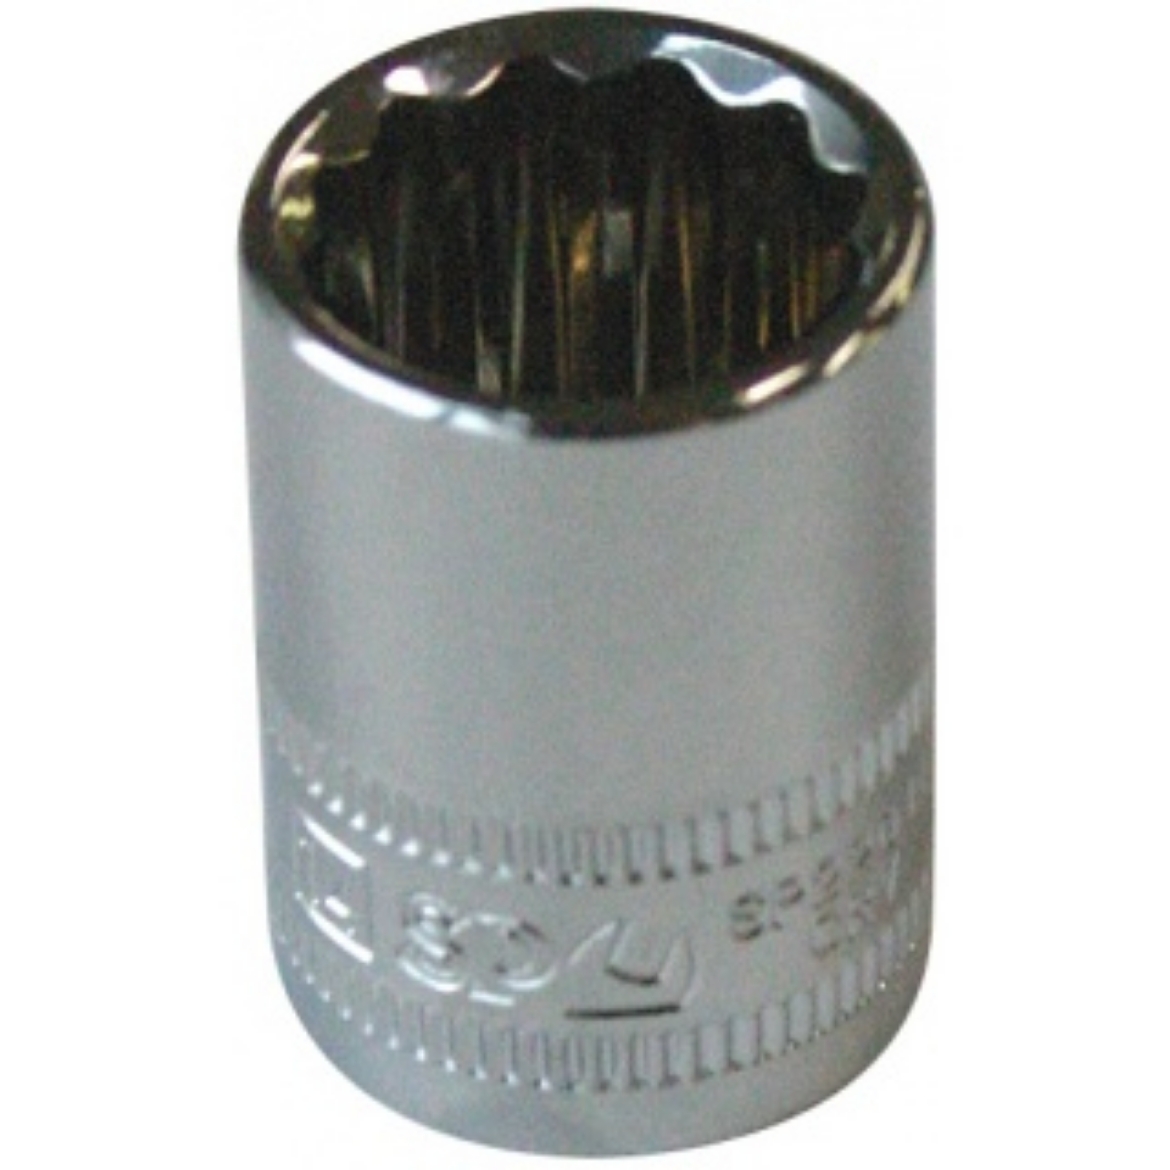 Picture of SOCKET 3/8"DR 12PT METRIC 11MM SP TOOLS